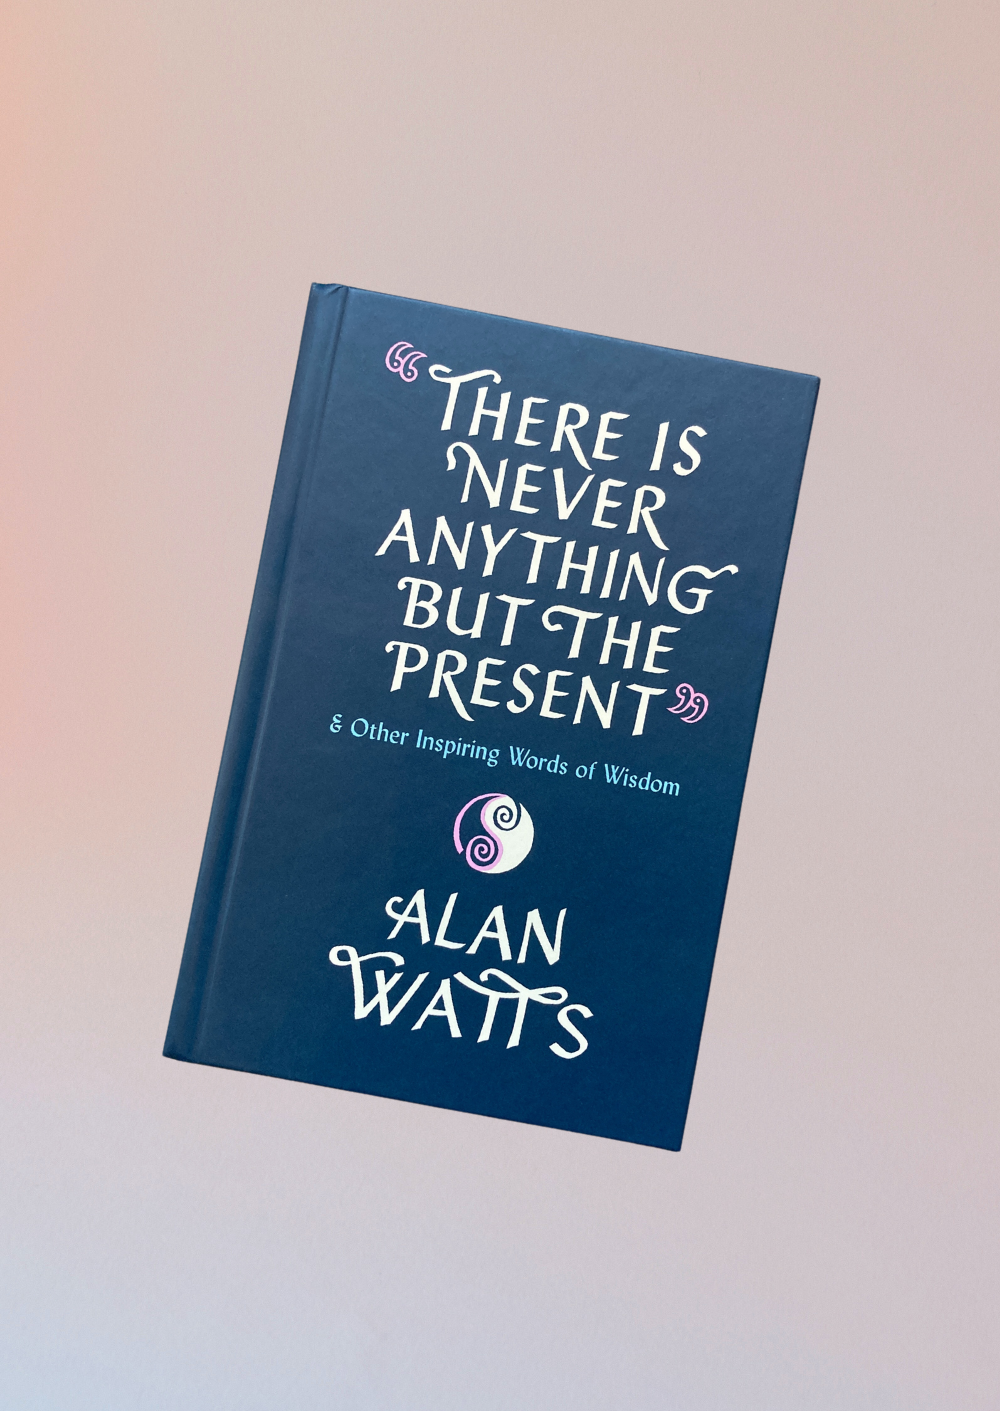 Alan Watts - There is Never Anything but the Present